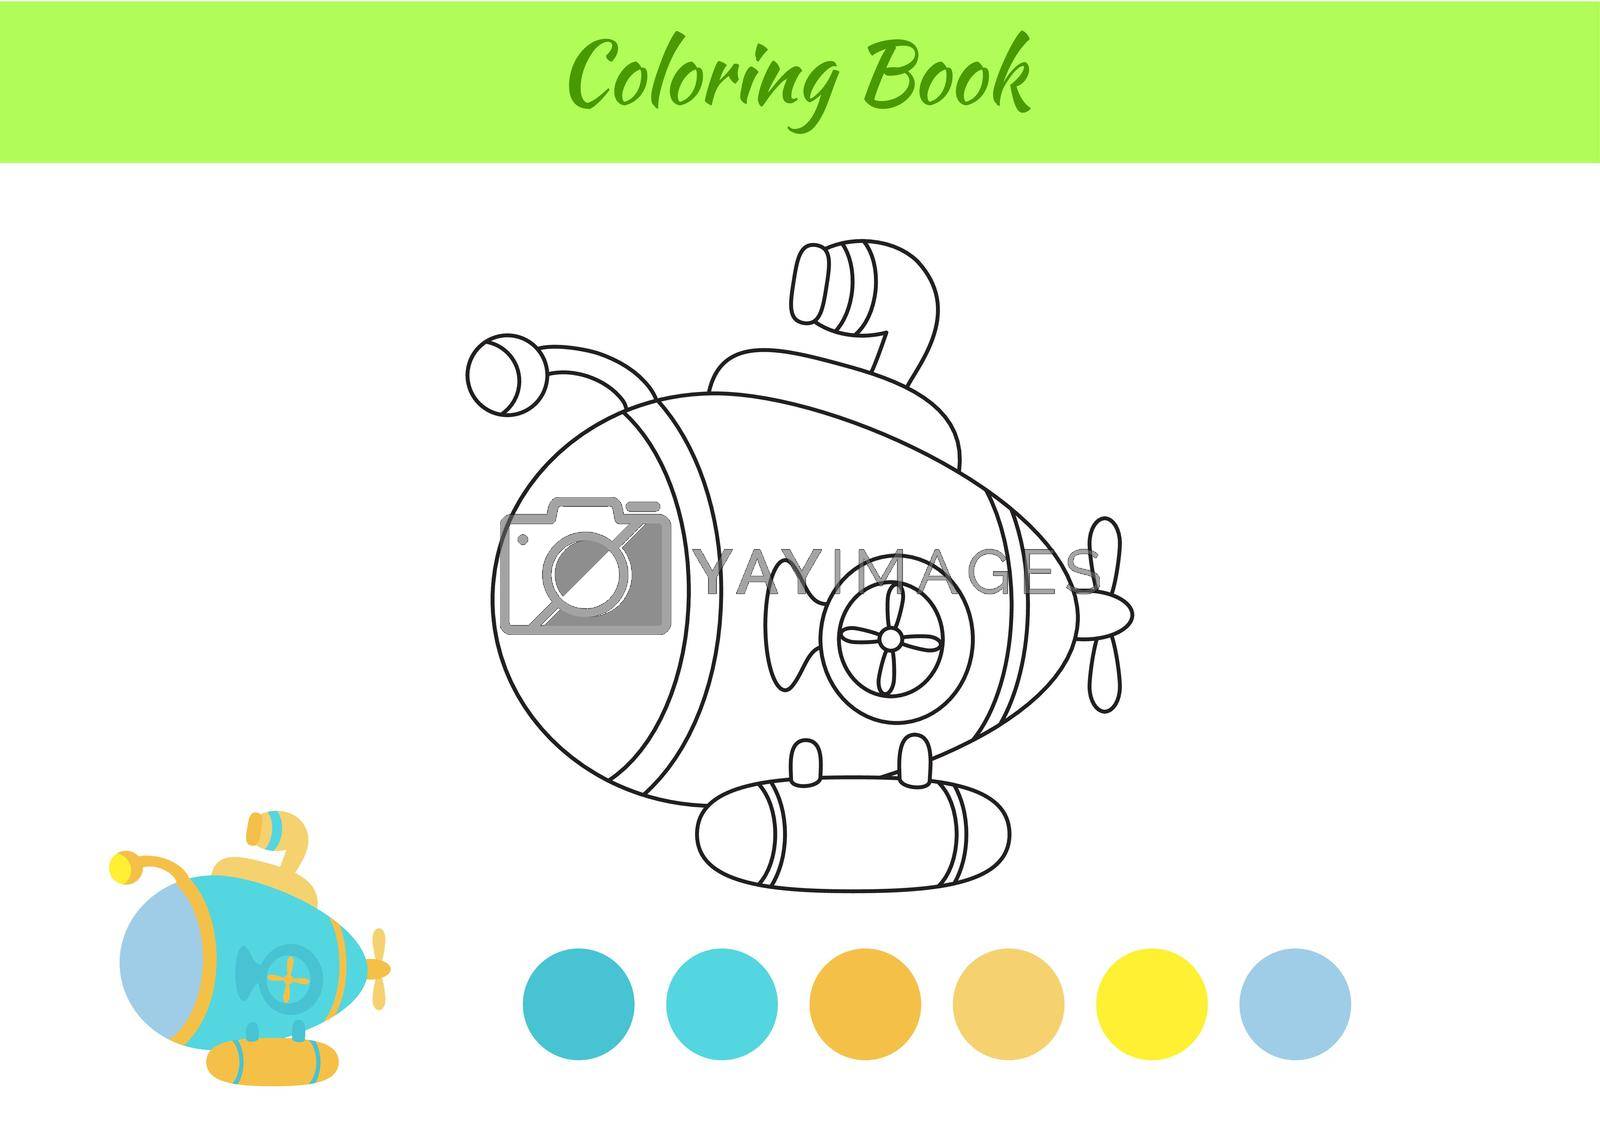 Coloring book submarine ship for kids. Educational activity page for preschool years kids and toddlers with transport. Printable worksheet. Cartoon colorful vector illustration.